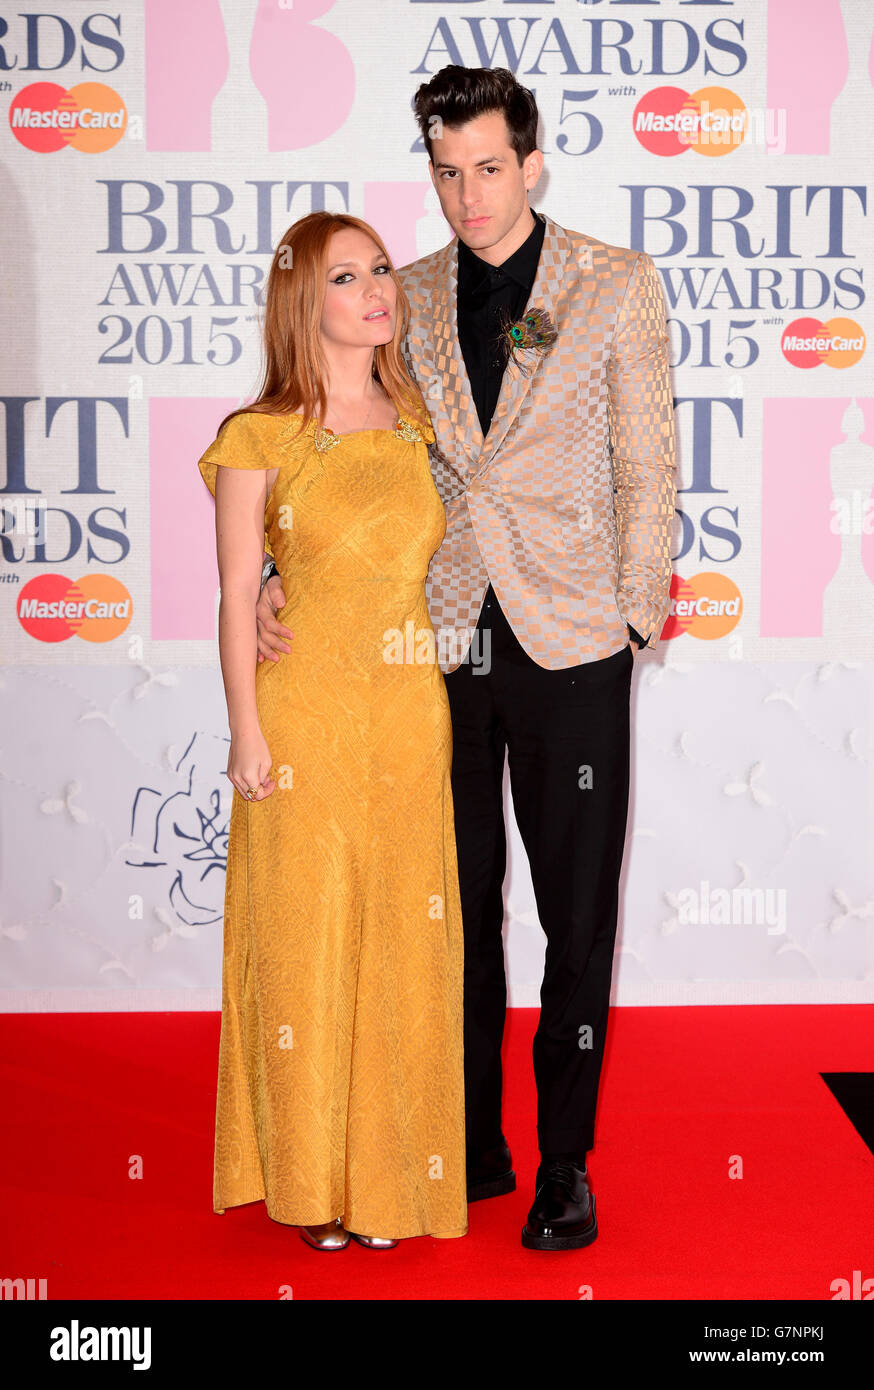 Mark Ronson and Josephine de La Baume arriving for the 2015 Brit Awards at the O2 Arena, London. PRESS ASSOCIATION Photo. Picture date: Wednesday February 25, 2015. See PA story SHOWBIZ Brits. Photo credit should read: Dominic Lipinski/PA Wire Stock Photo